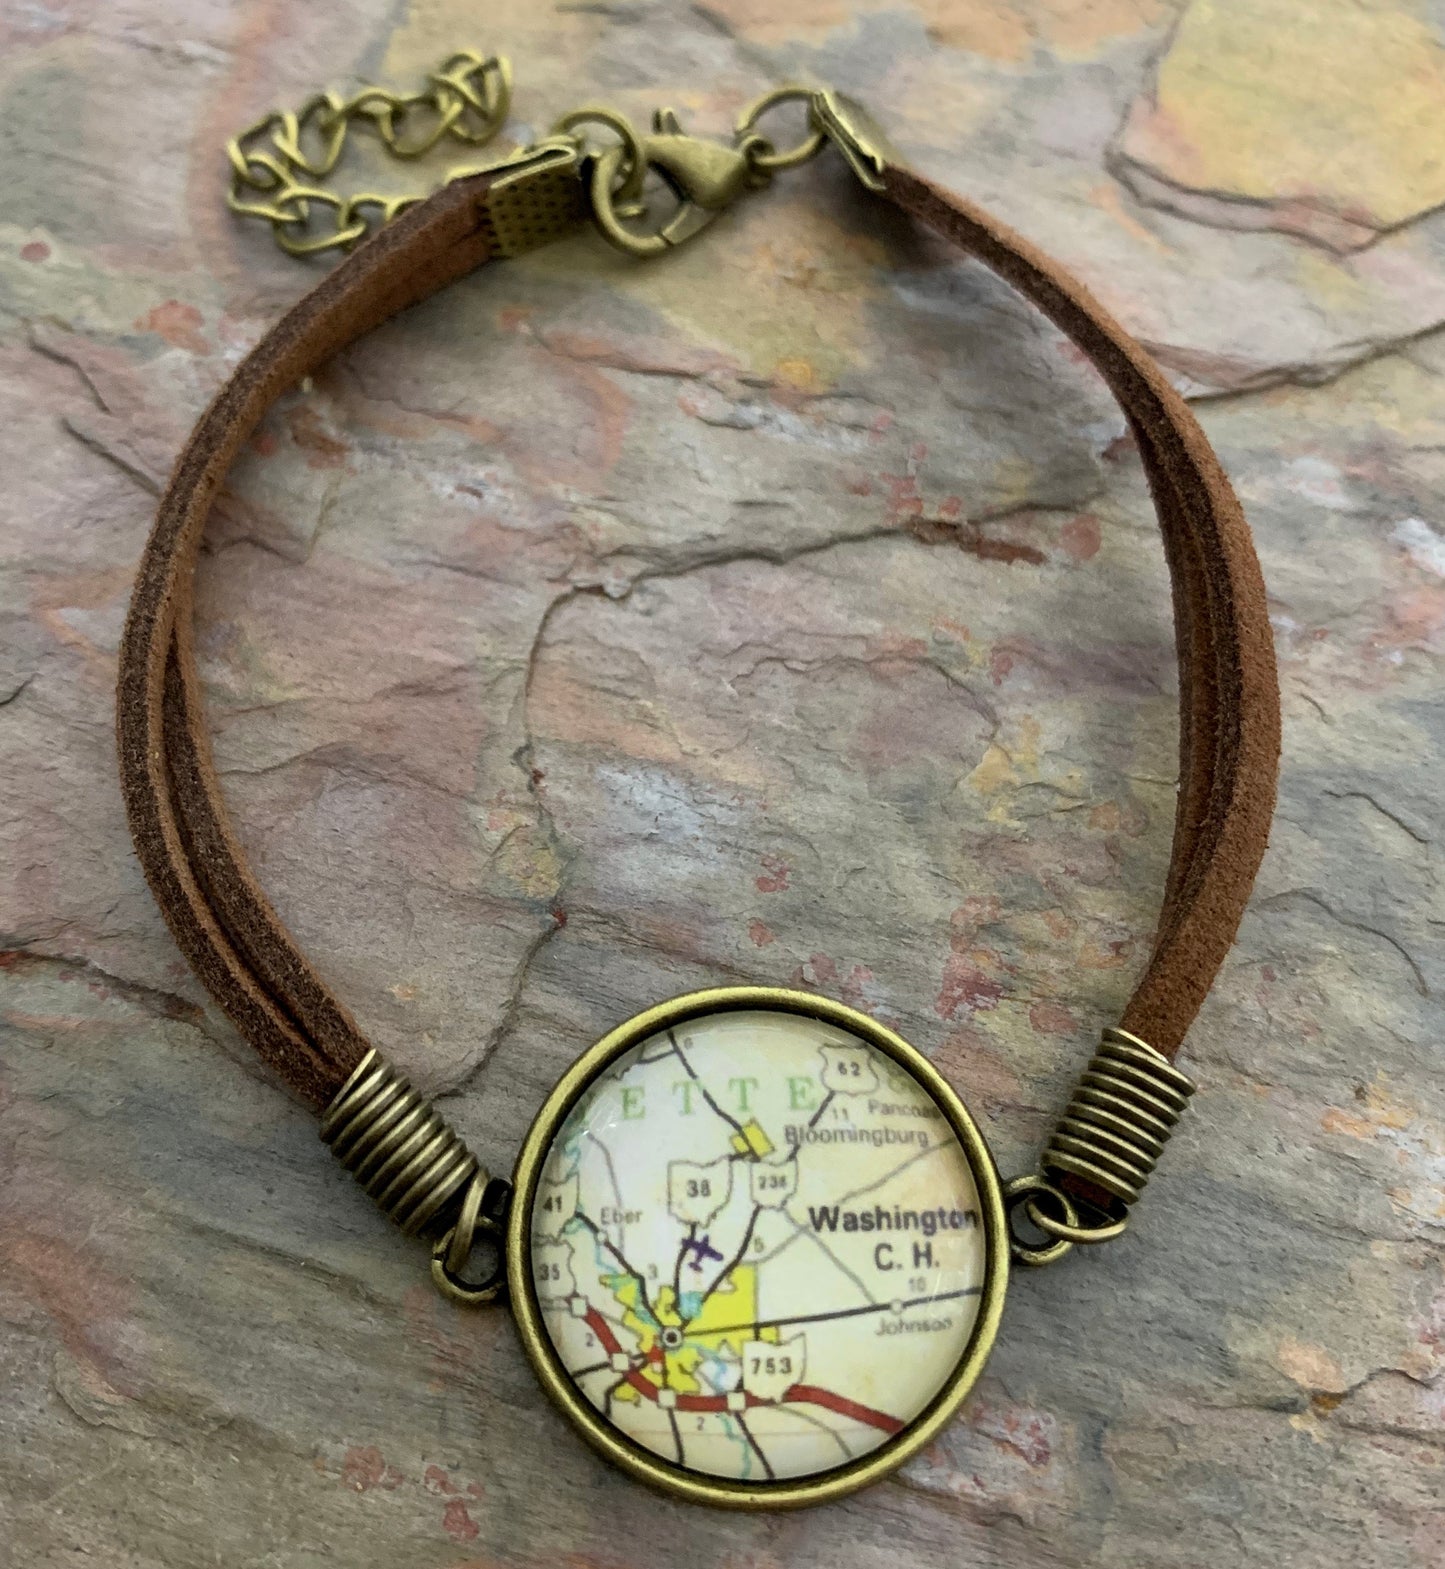 Vintage Metal Bracelet with Leather Strap (customized)